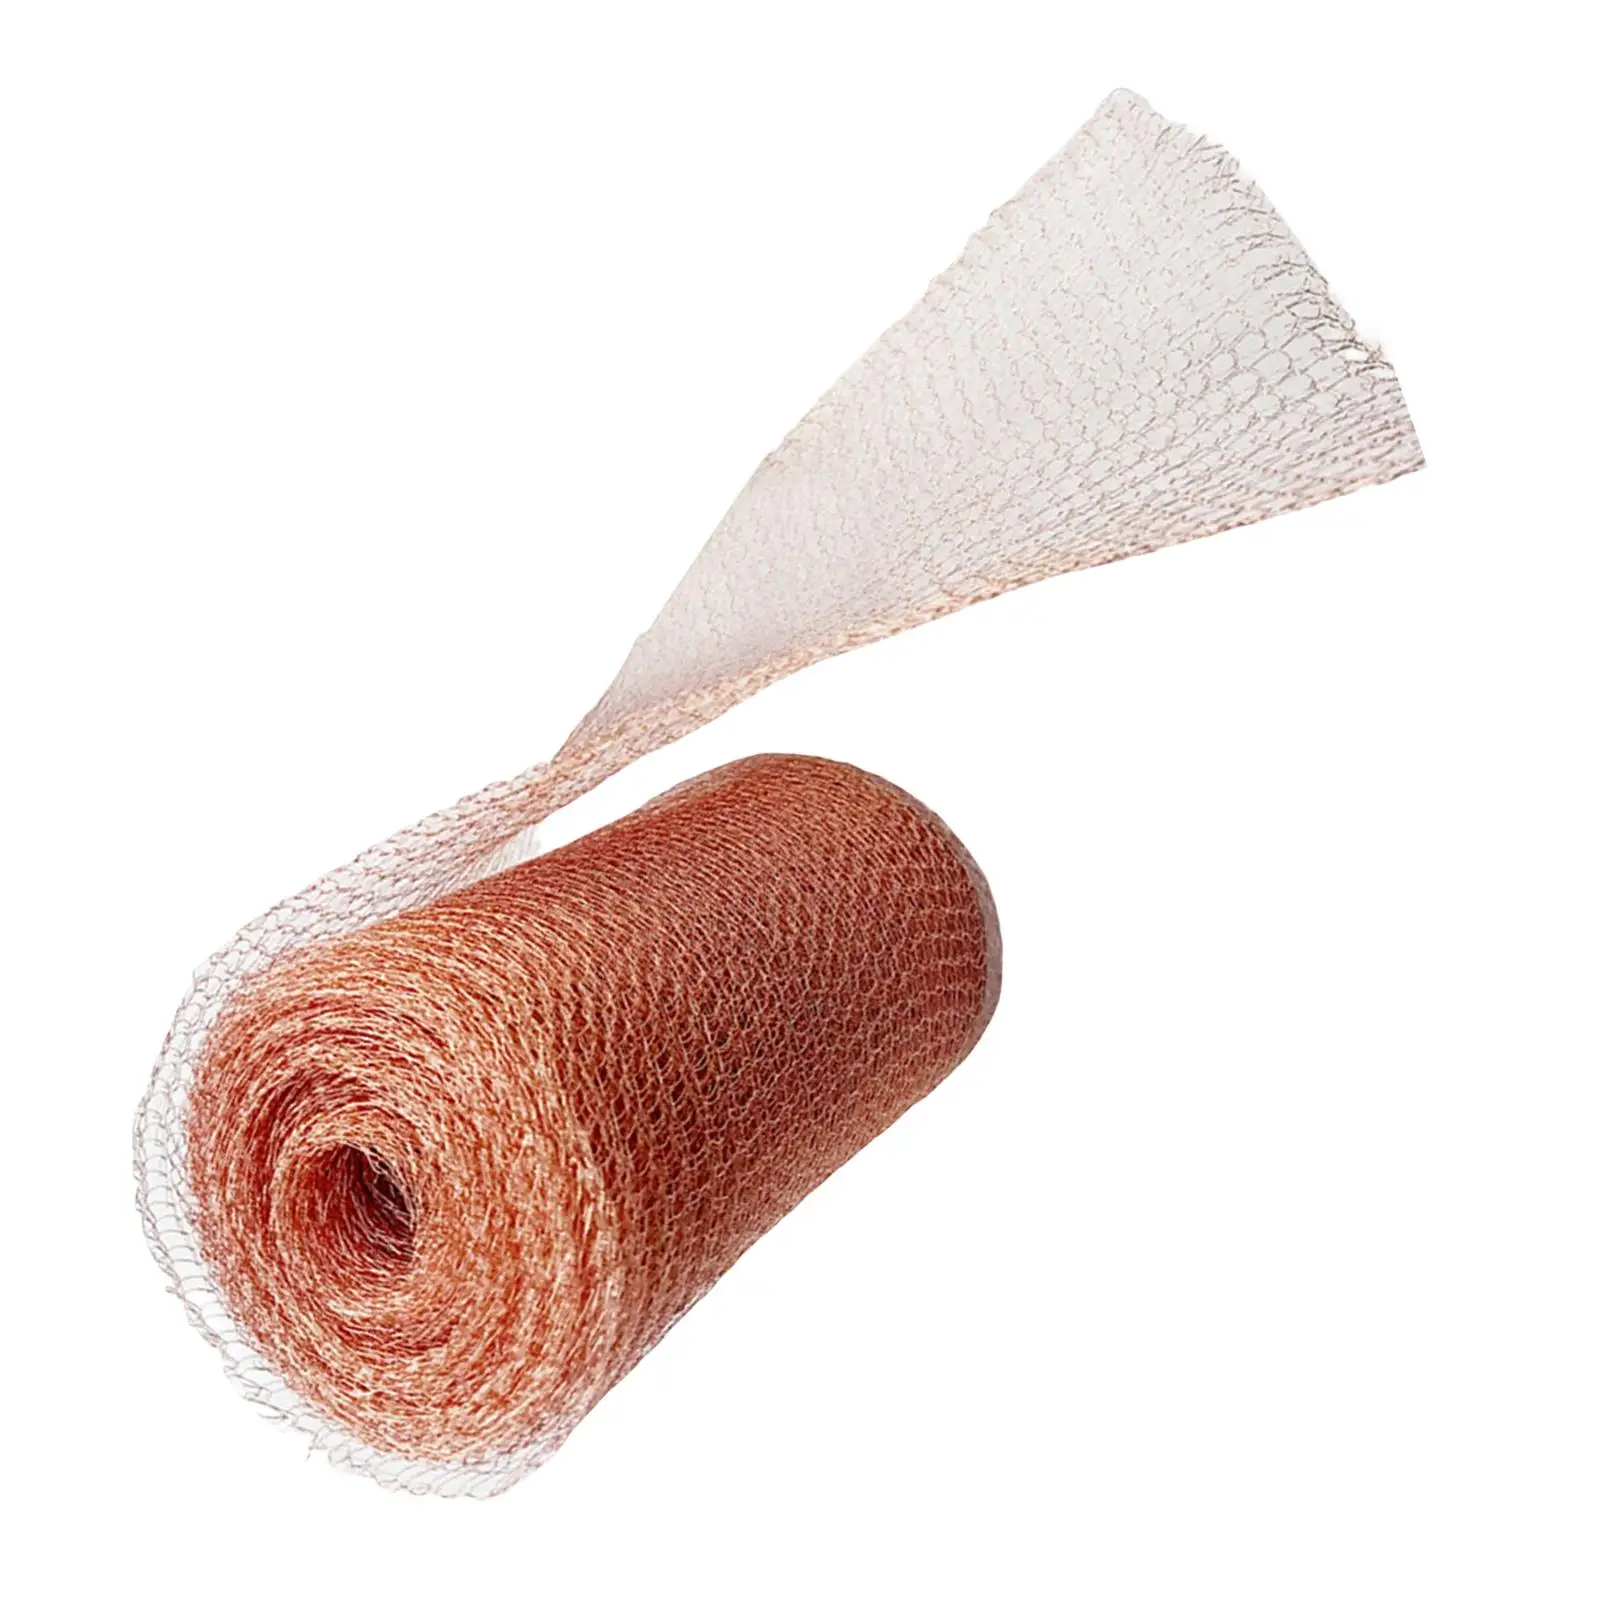 

Copper Wire Mesh Gap Copper Fill Fabric Easy to Use Professional Rust Resistant Woven Mesh Screen for Distillation Garden Home